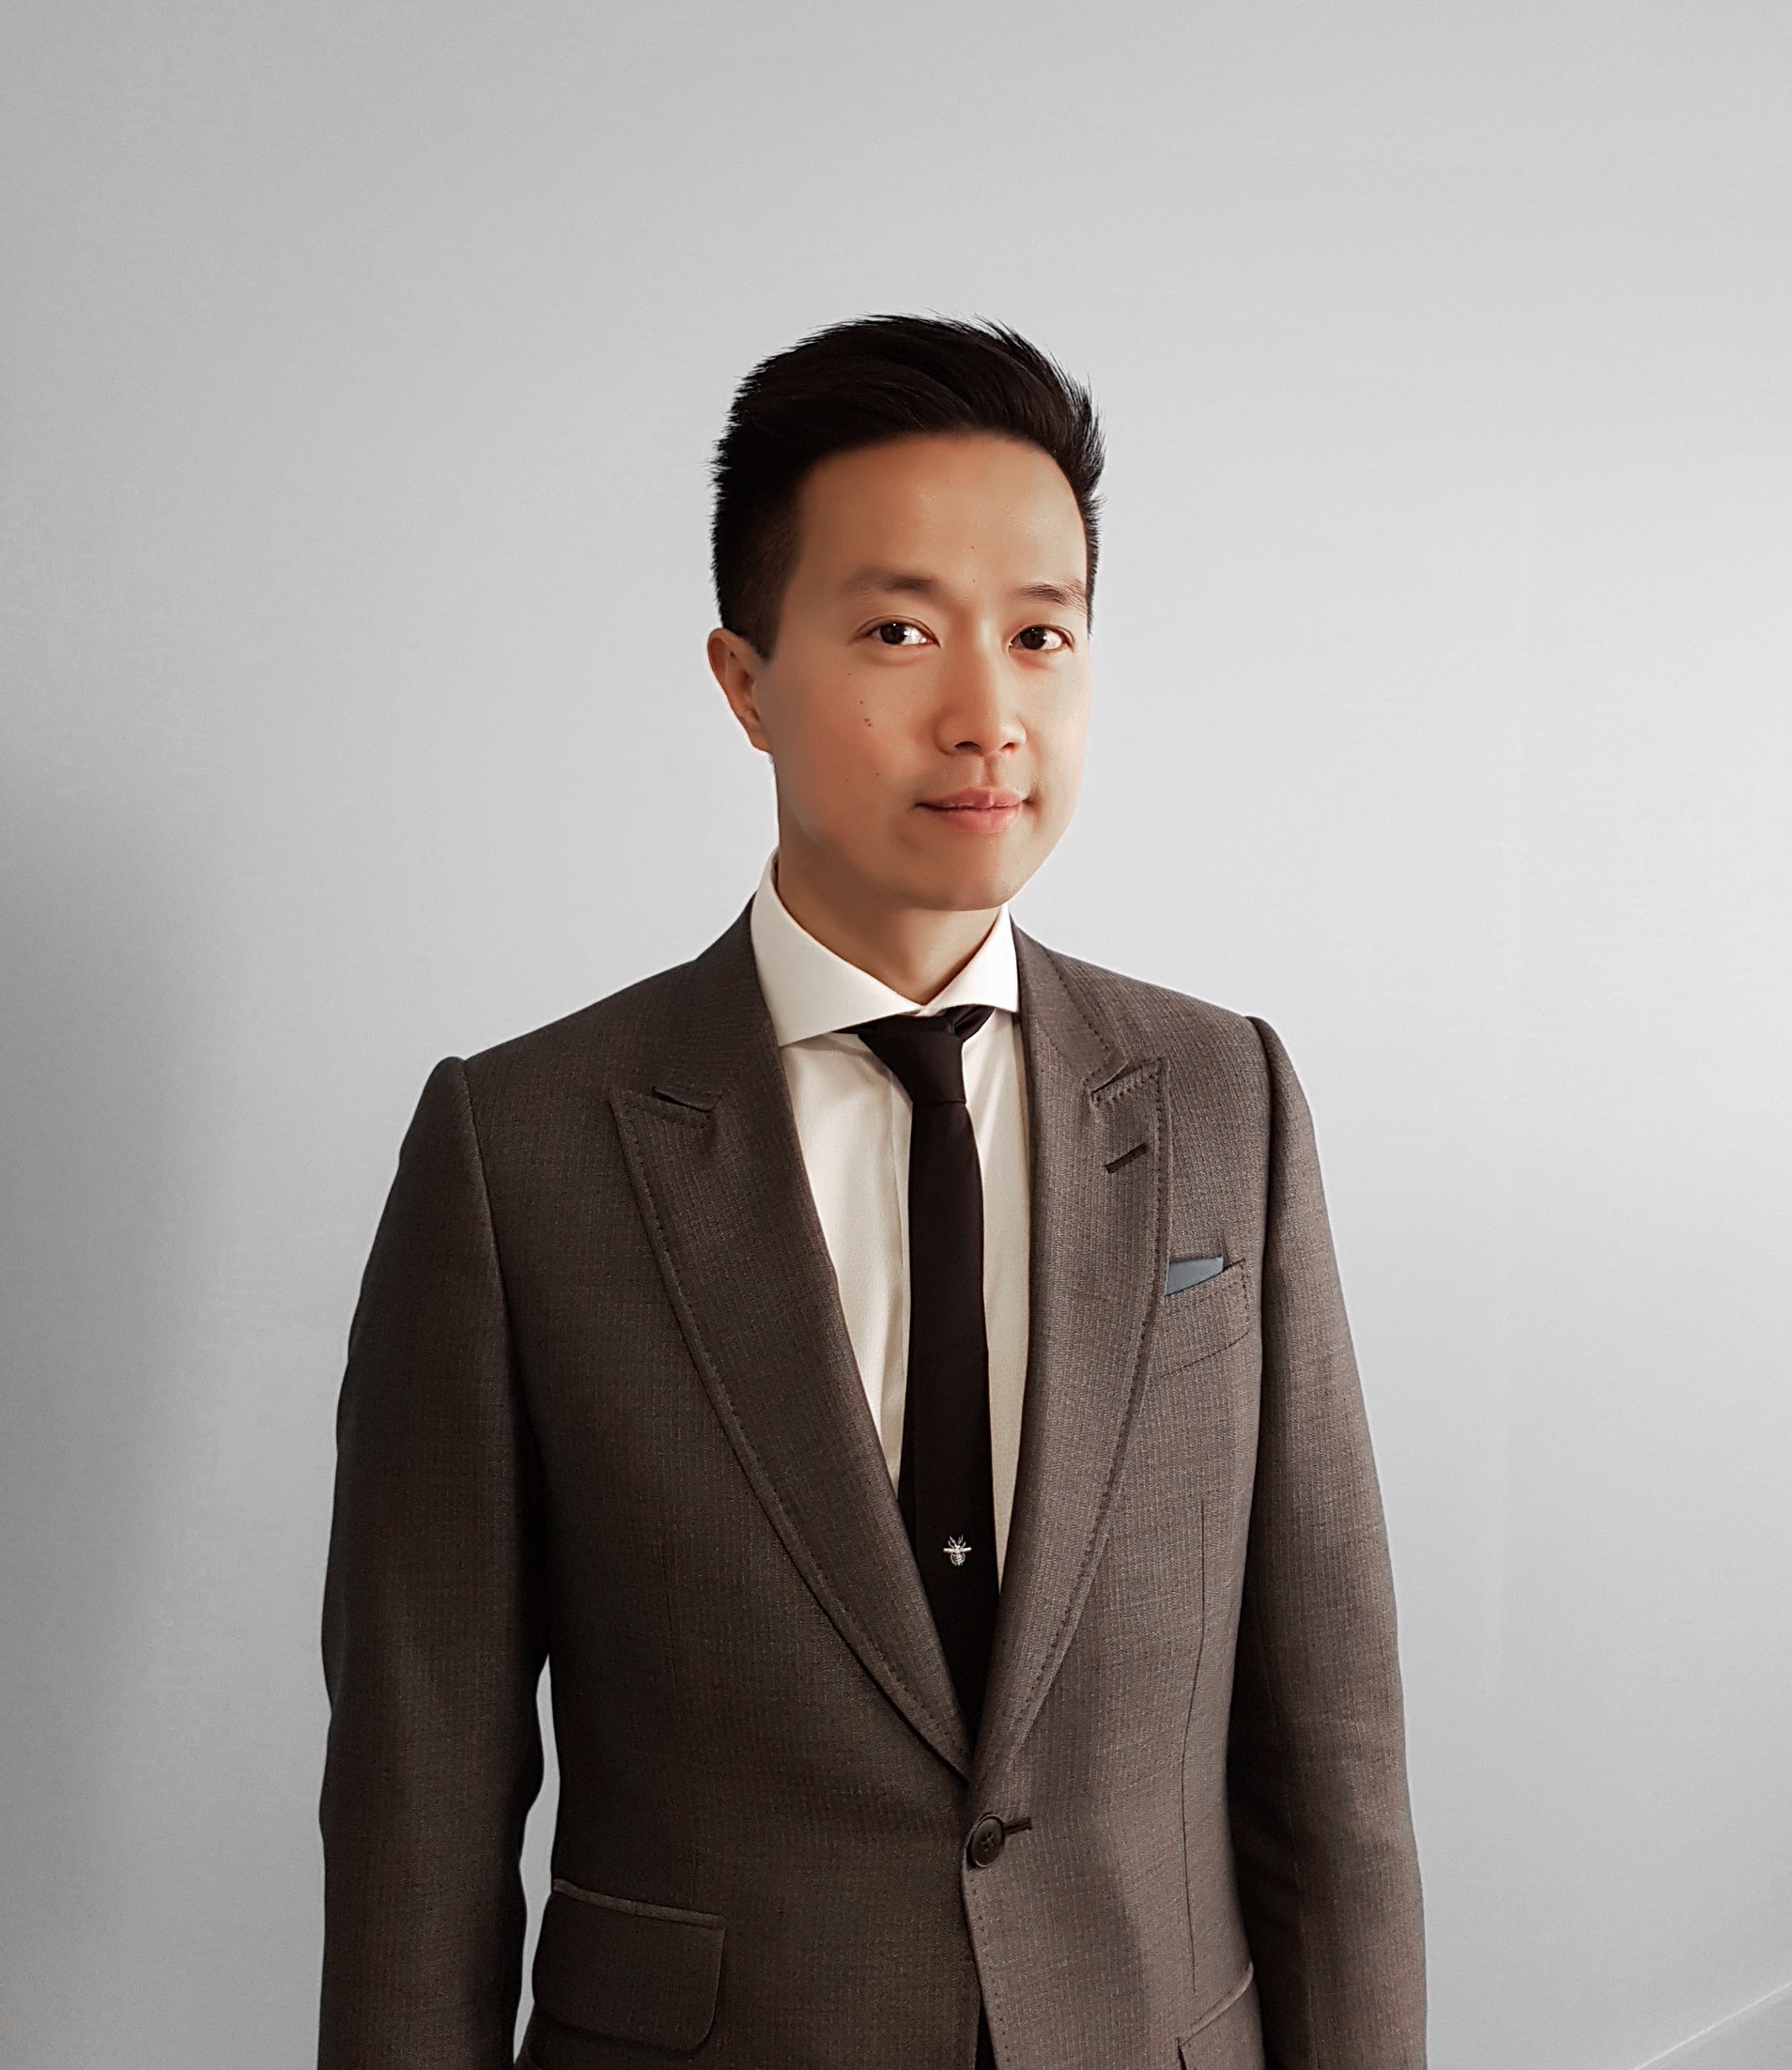 Kevin Au-yeung, president of InnoVision, the holding company of Nobis